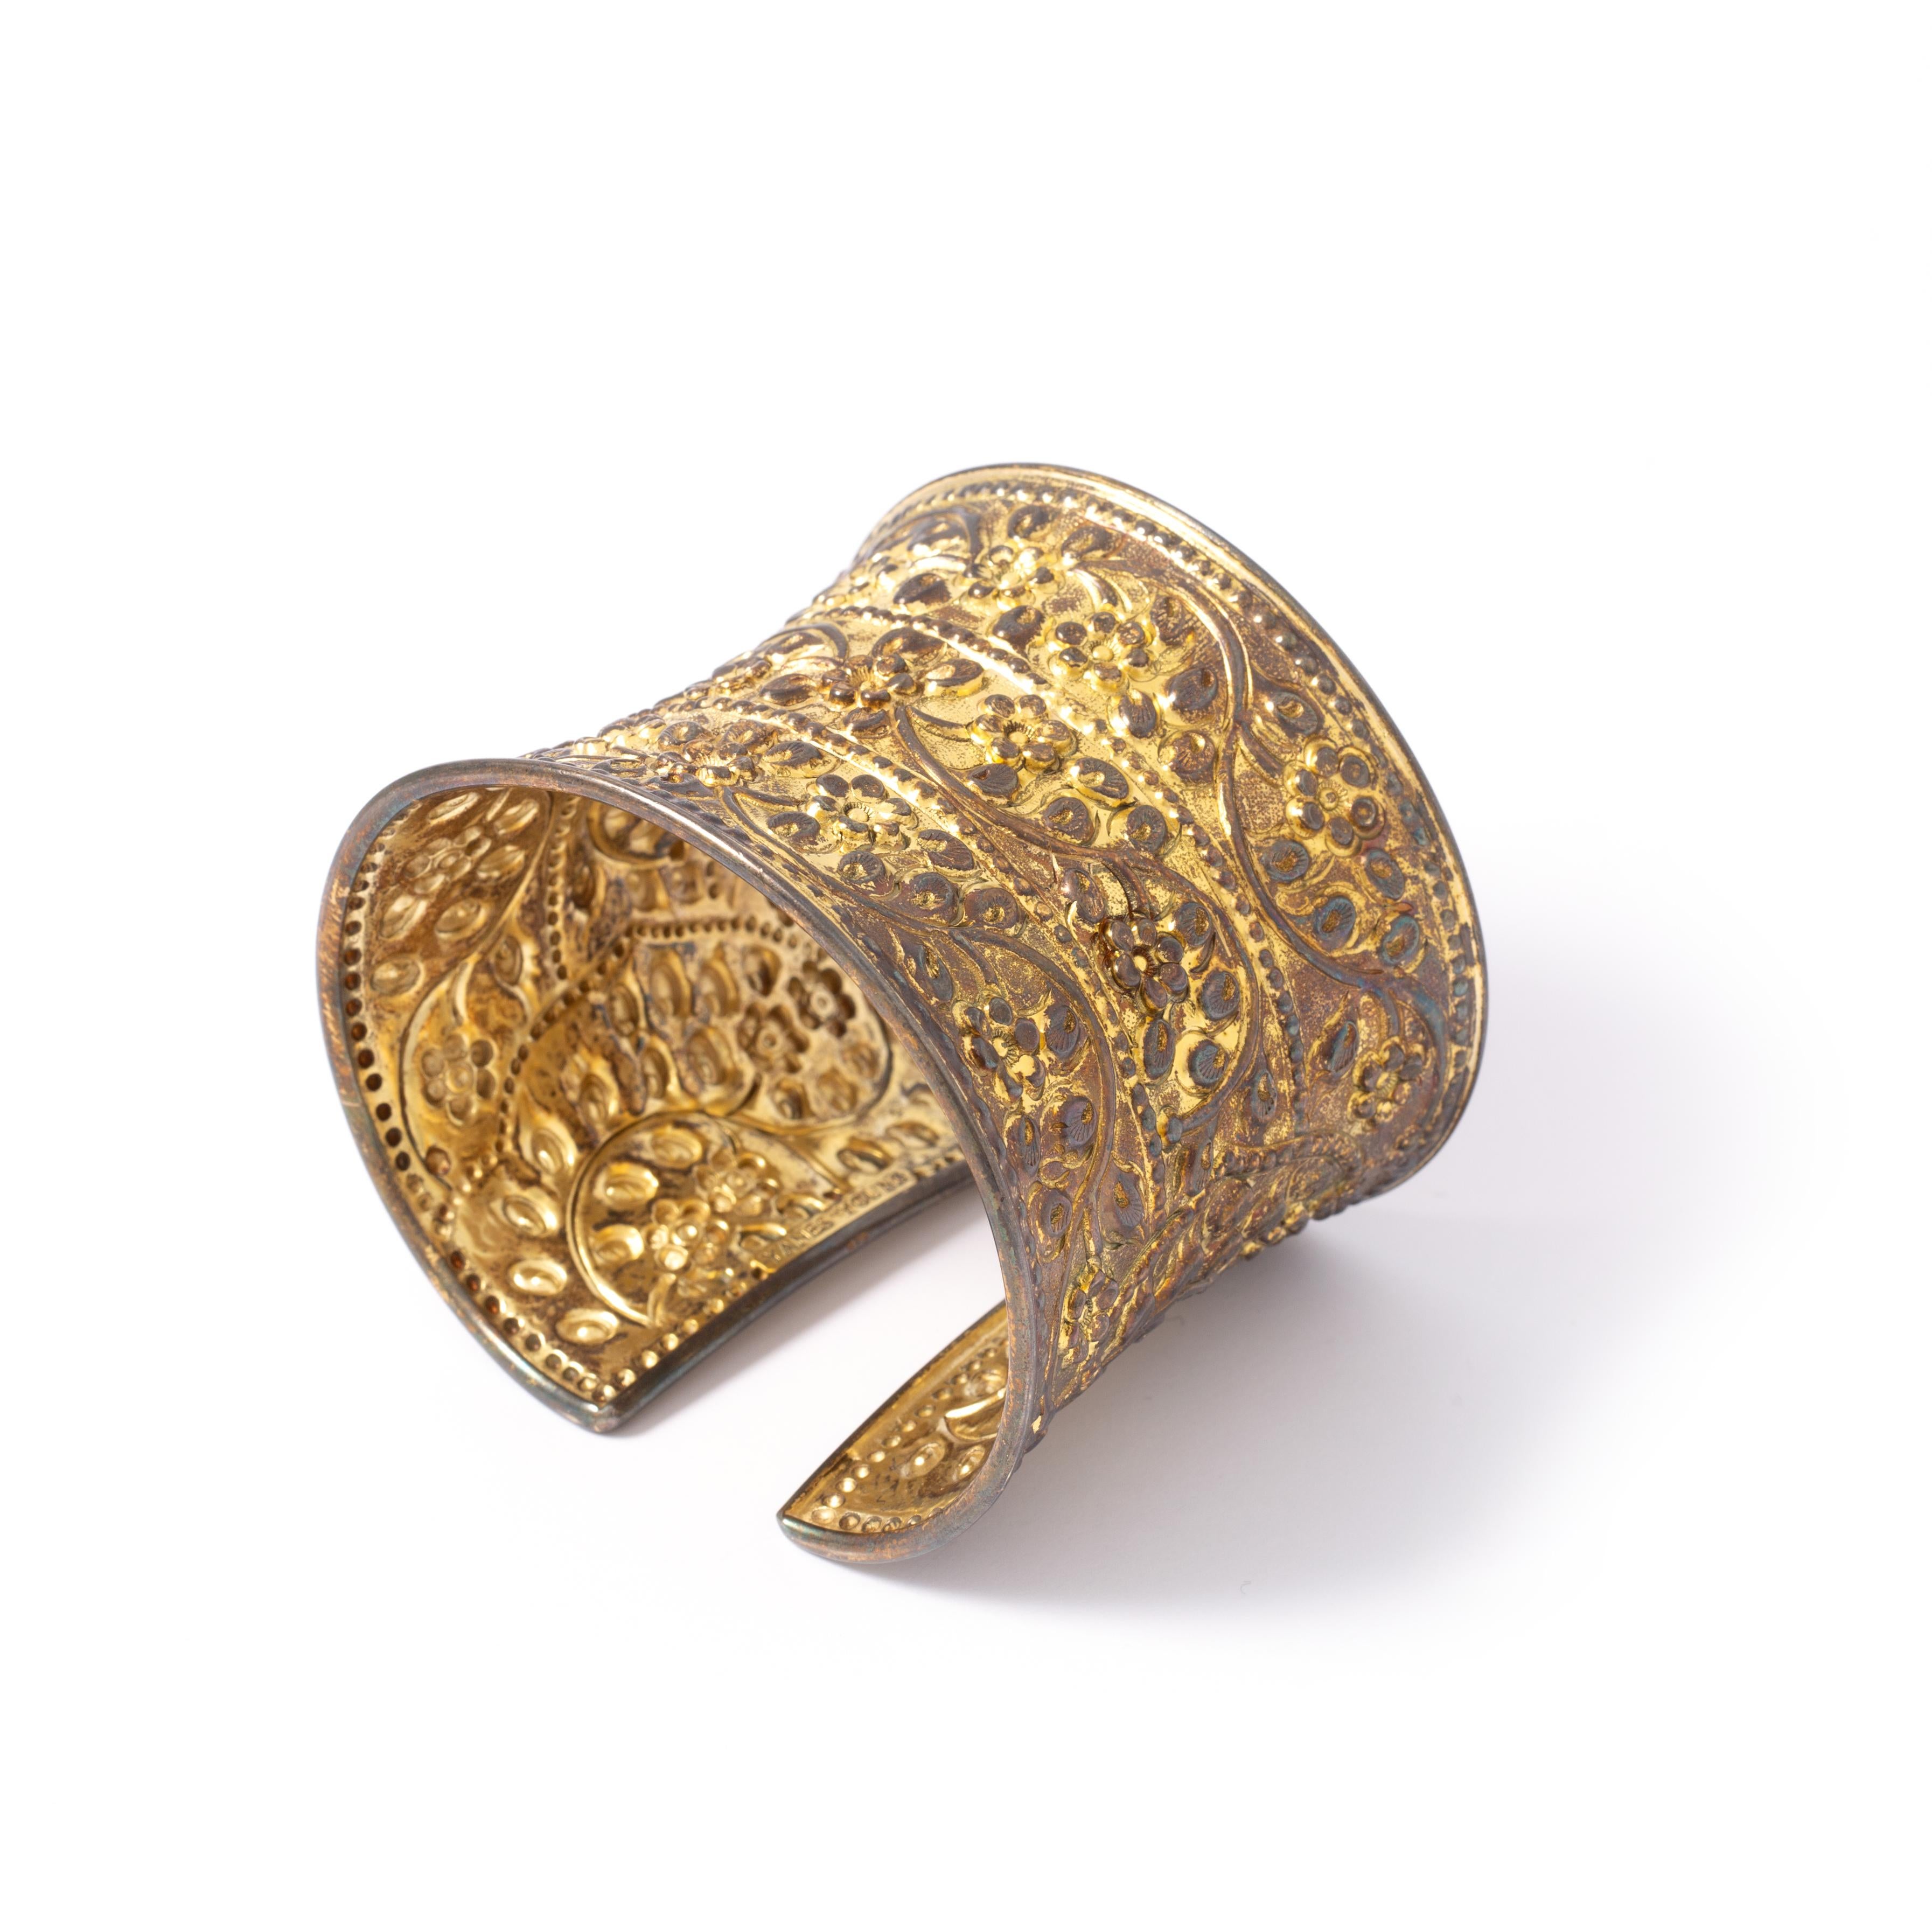 Etruscan Revival Cuff.
Inner circumference: Approximately 19.62 centimeters.

Total weight: 72.99 grams.
Width: 5.30 centimeters.